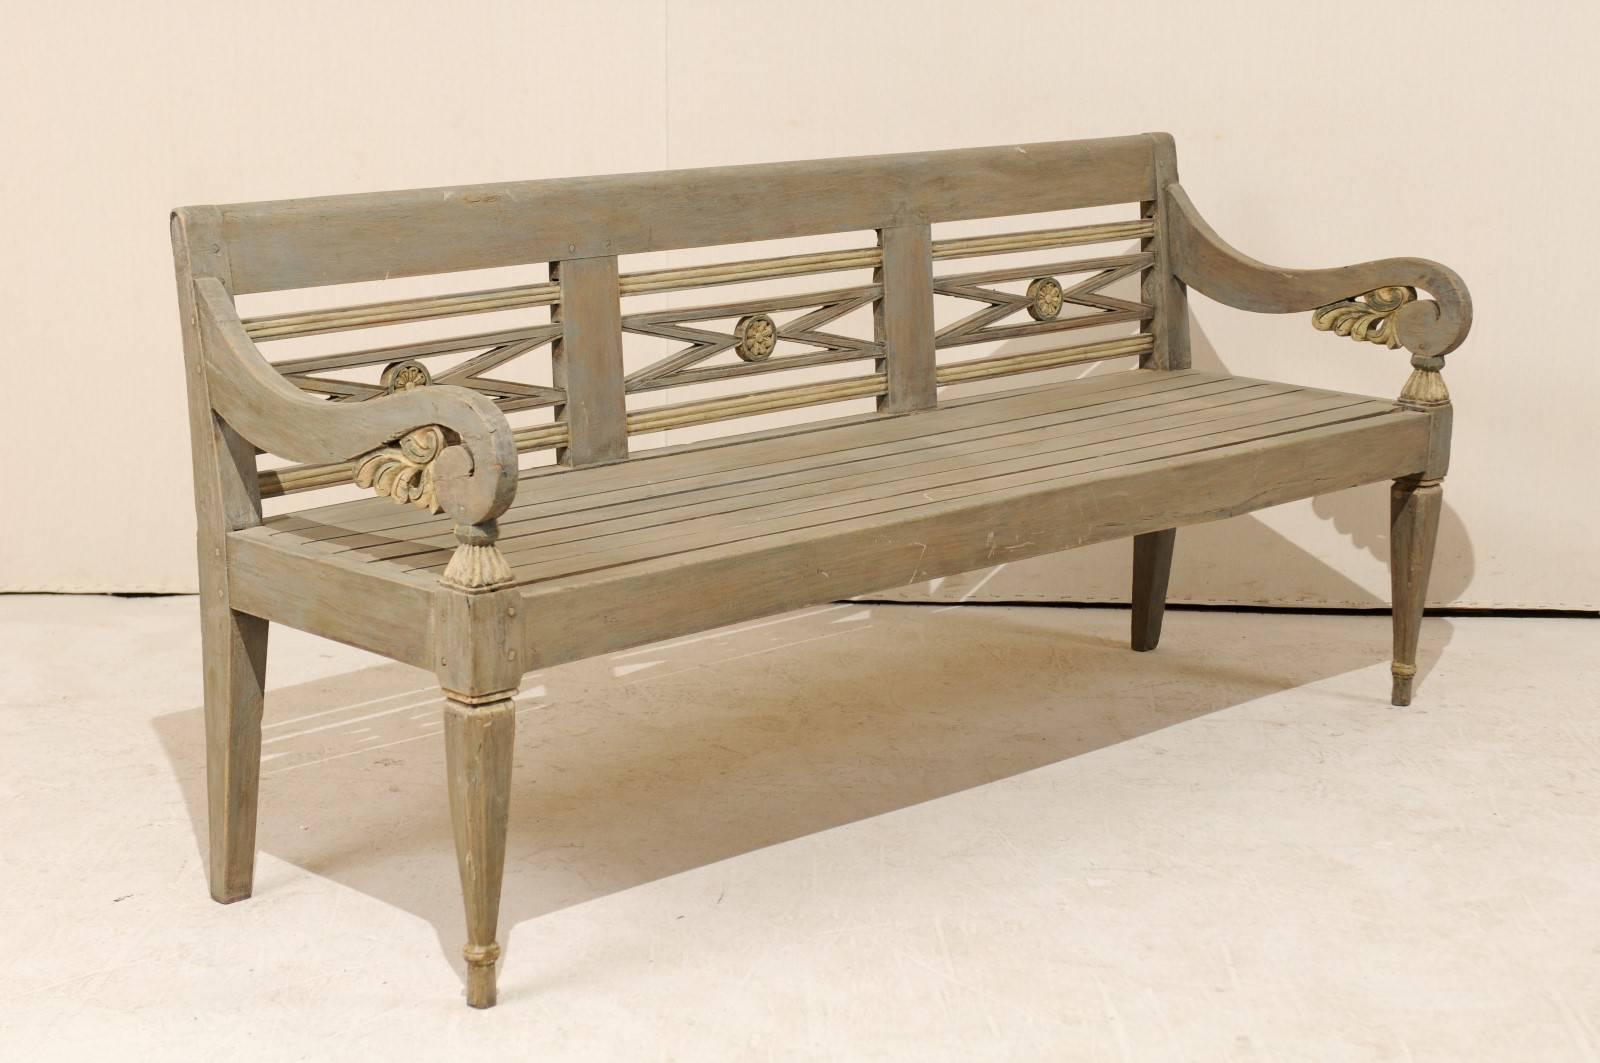 A painted teak wood sofa bench. This Dutch Colonial style painted teak bench is from the mid-20th century, Indonesian. The bench has swagged arms with a carved leaf motif and scroll at the knuckles, tapered front legs and a horizontally designed,